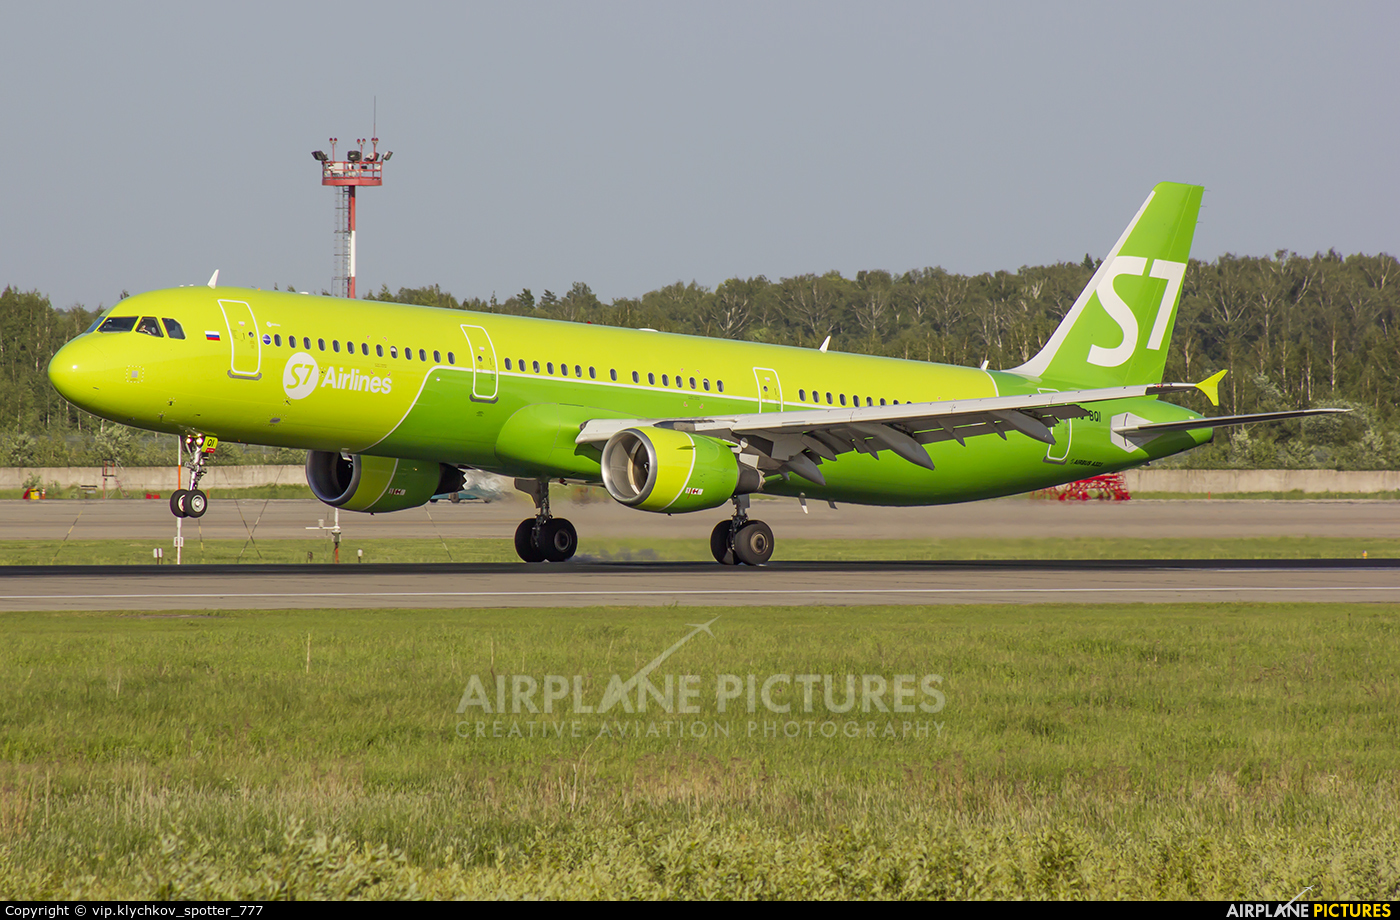 S7 Airlines VQ-BQI aircraft at Moscow - Domodedovo